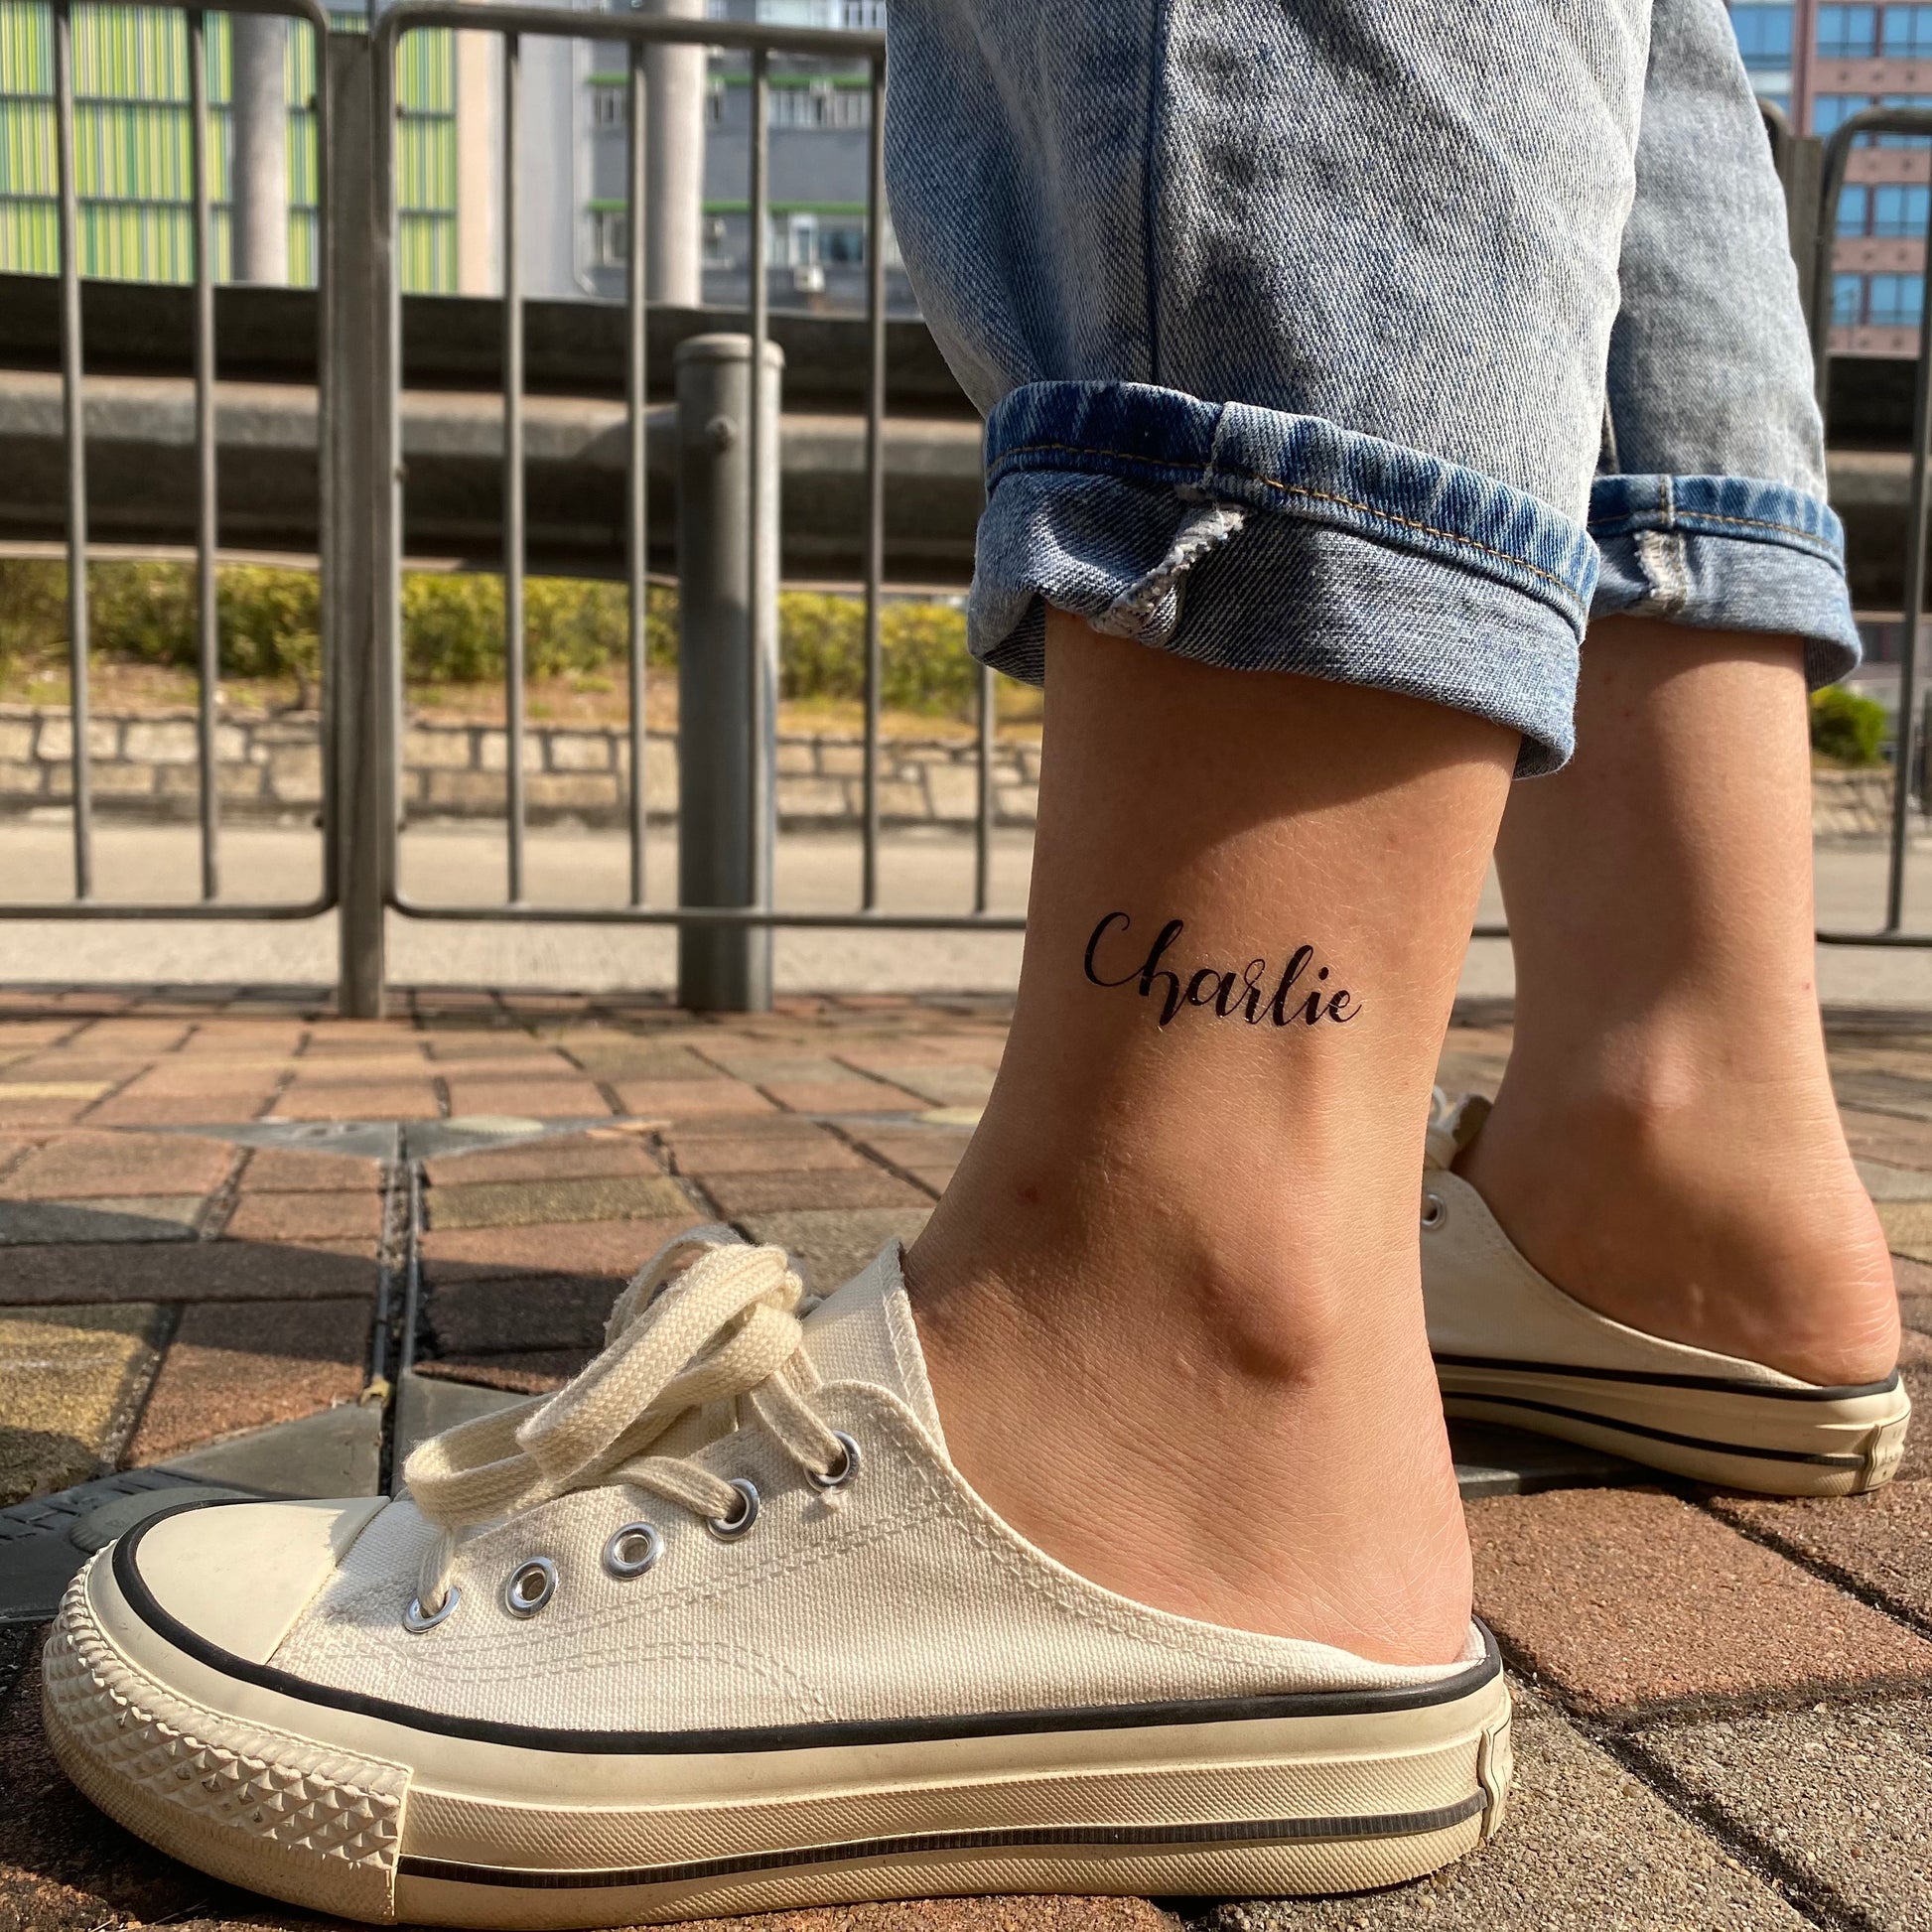 fake small Charlie name lettering temporary tattoo sticker design idea on ankle leg